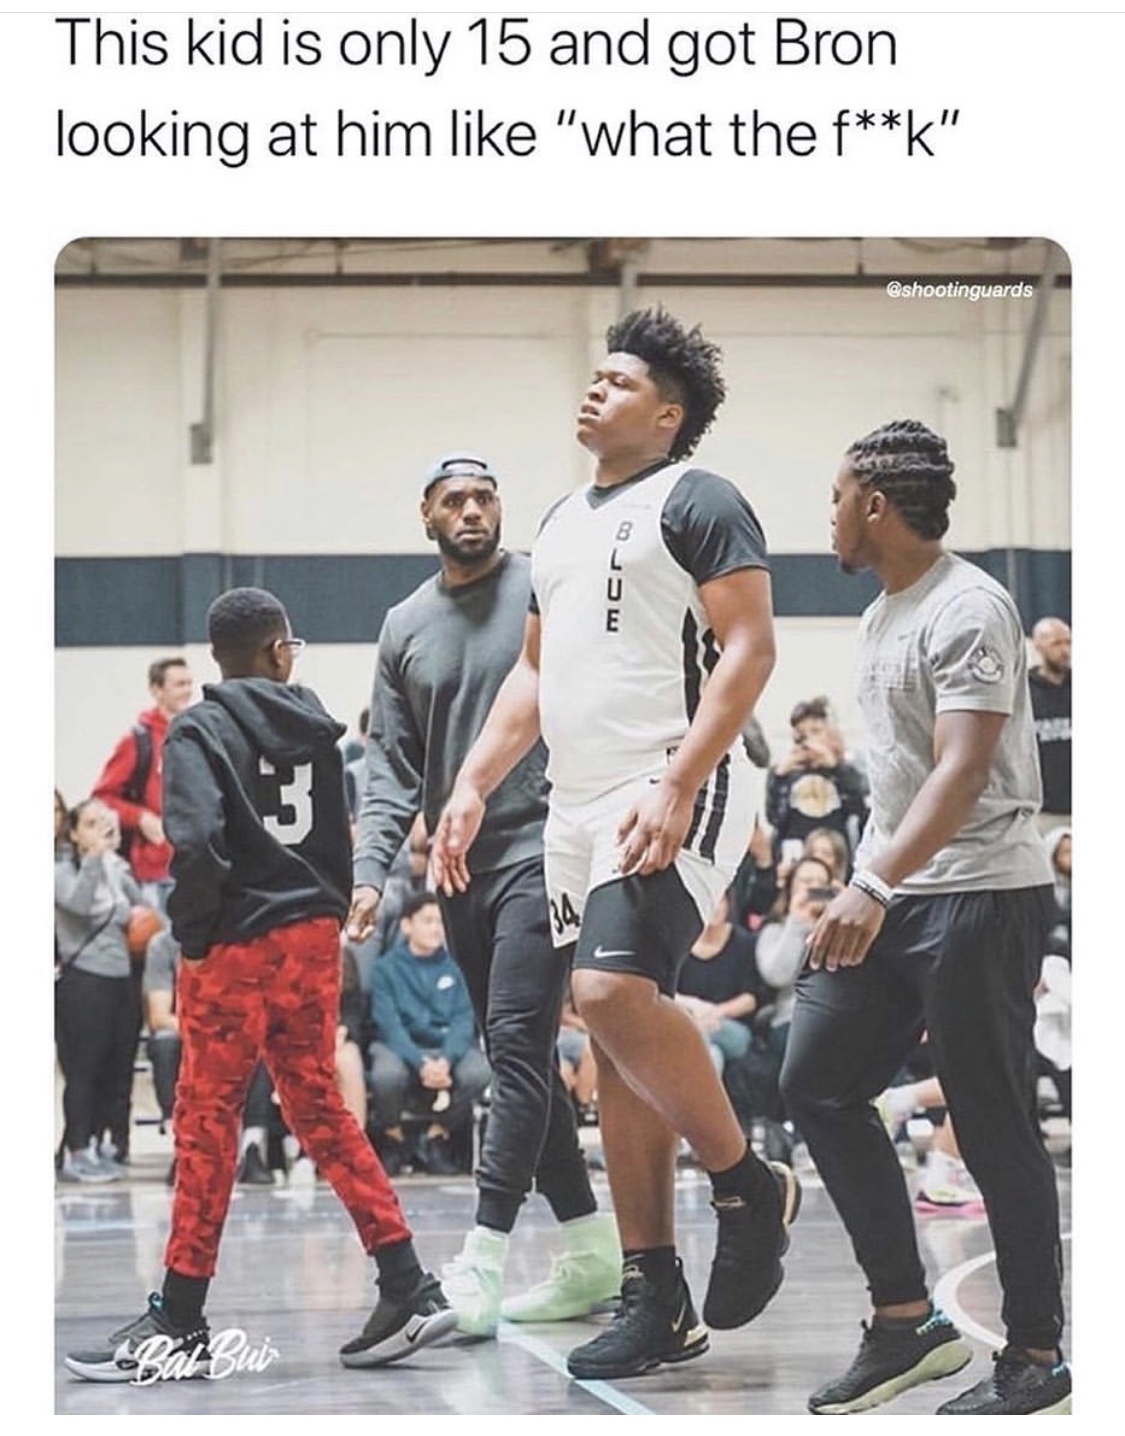 lebron 15 year old kid - This kid is only 15 and got Bron looking at him "what the fk". f marco